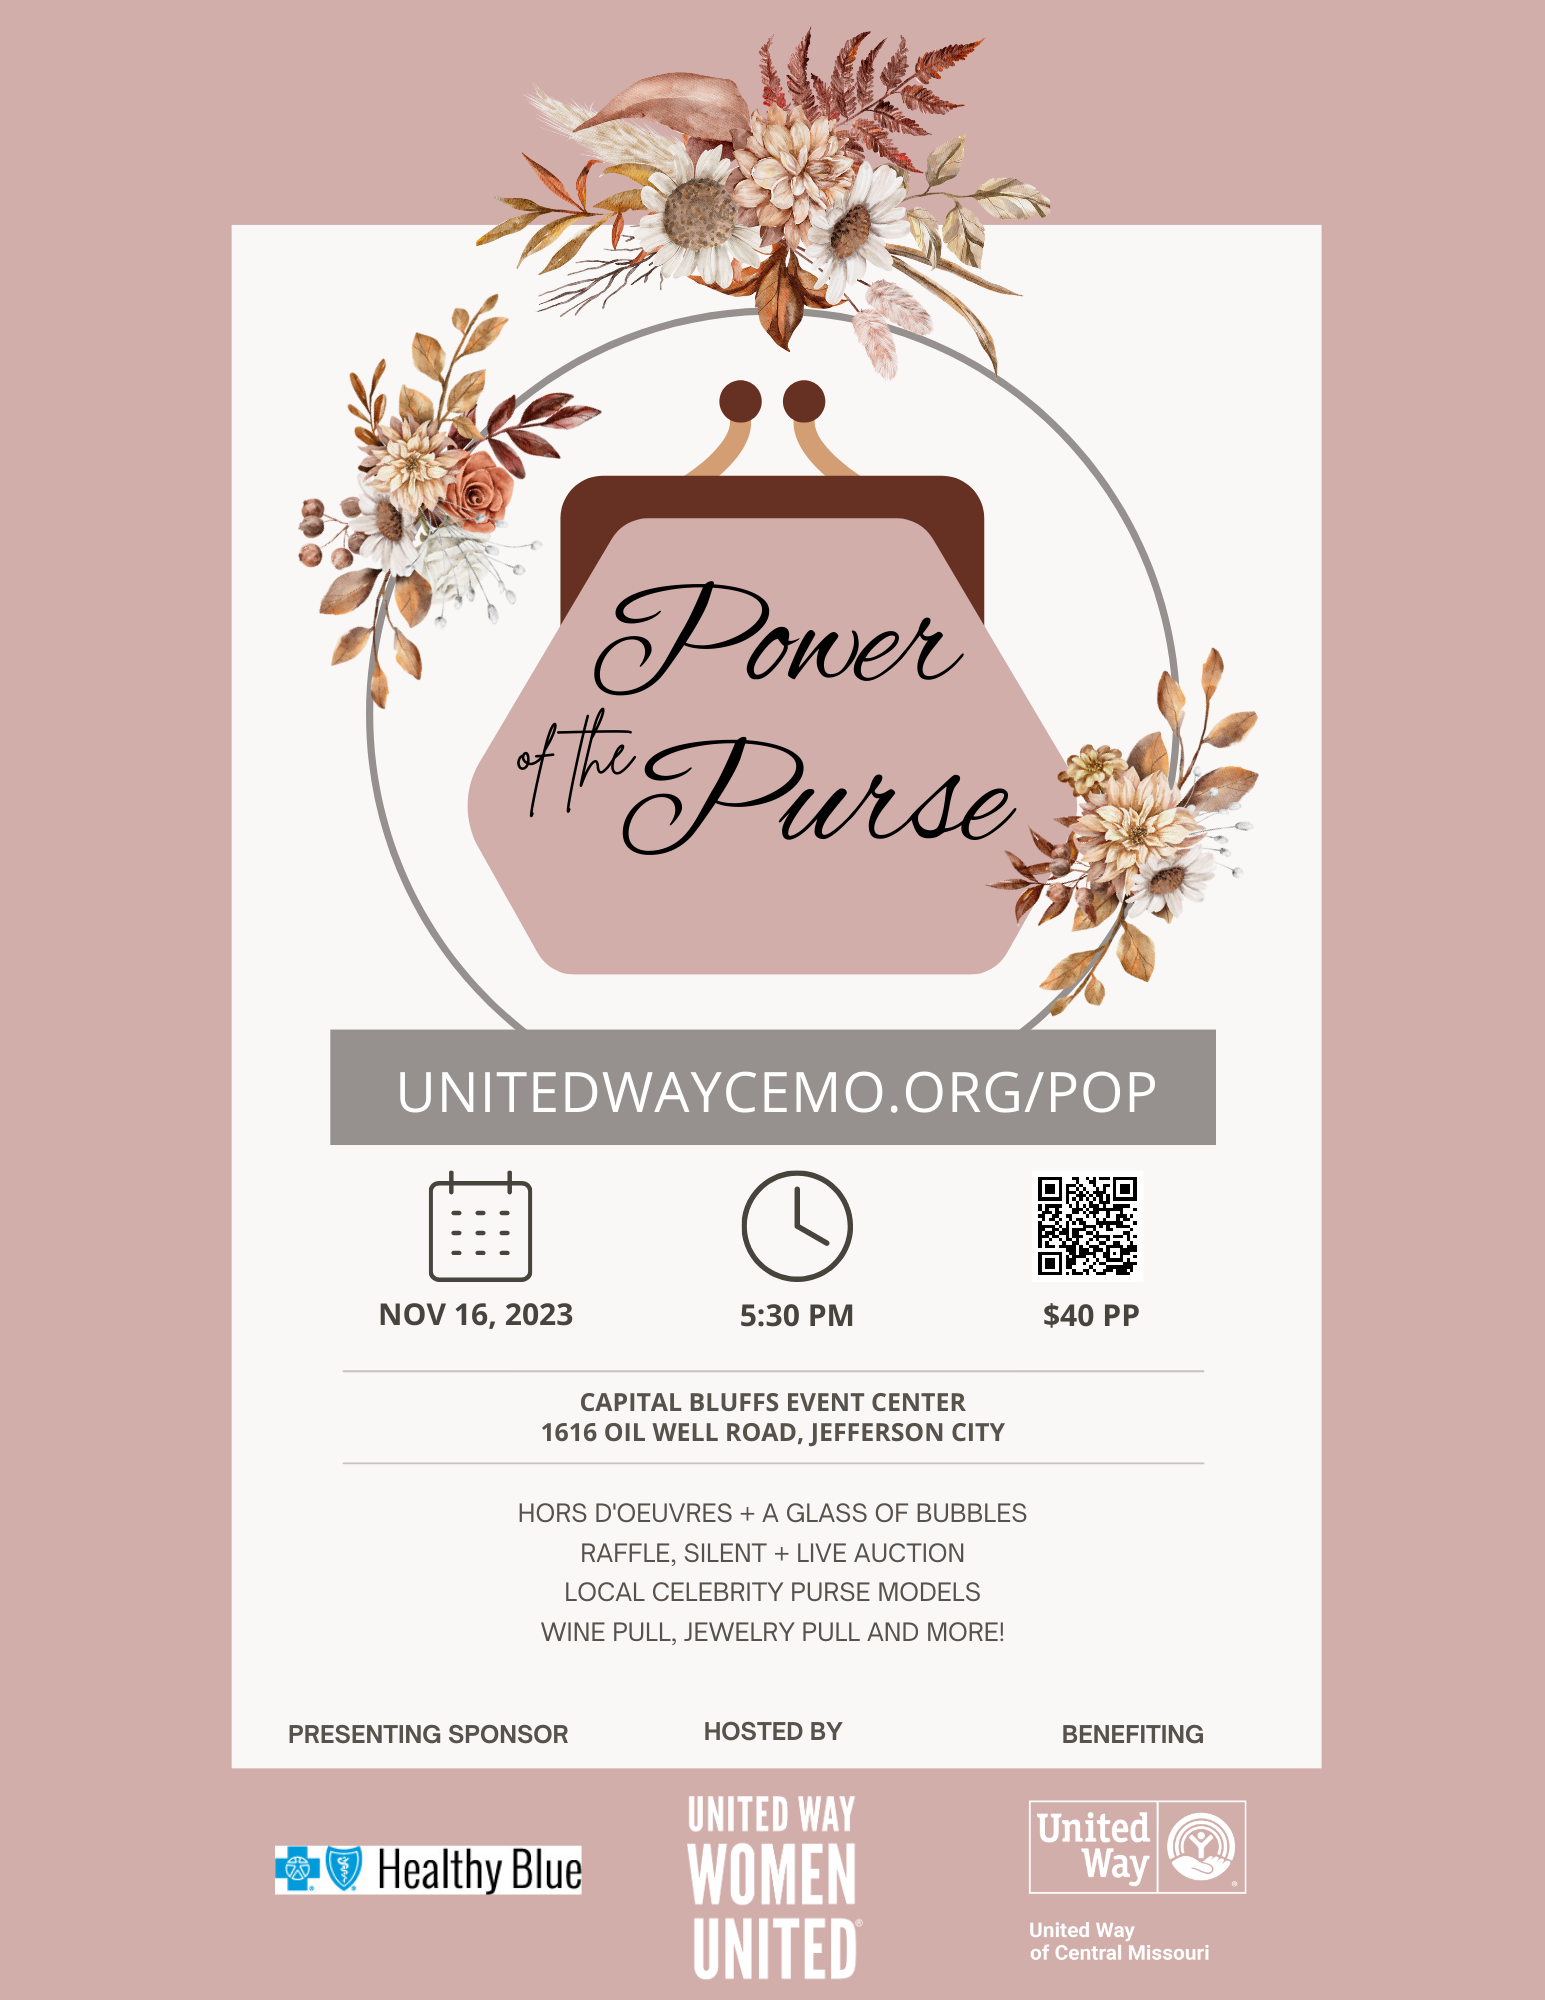 Power of the Purse 2022 to Benefit Every Woman's Place Oct 13th